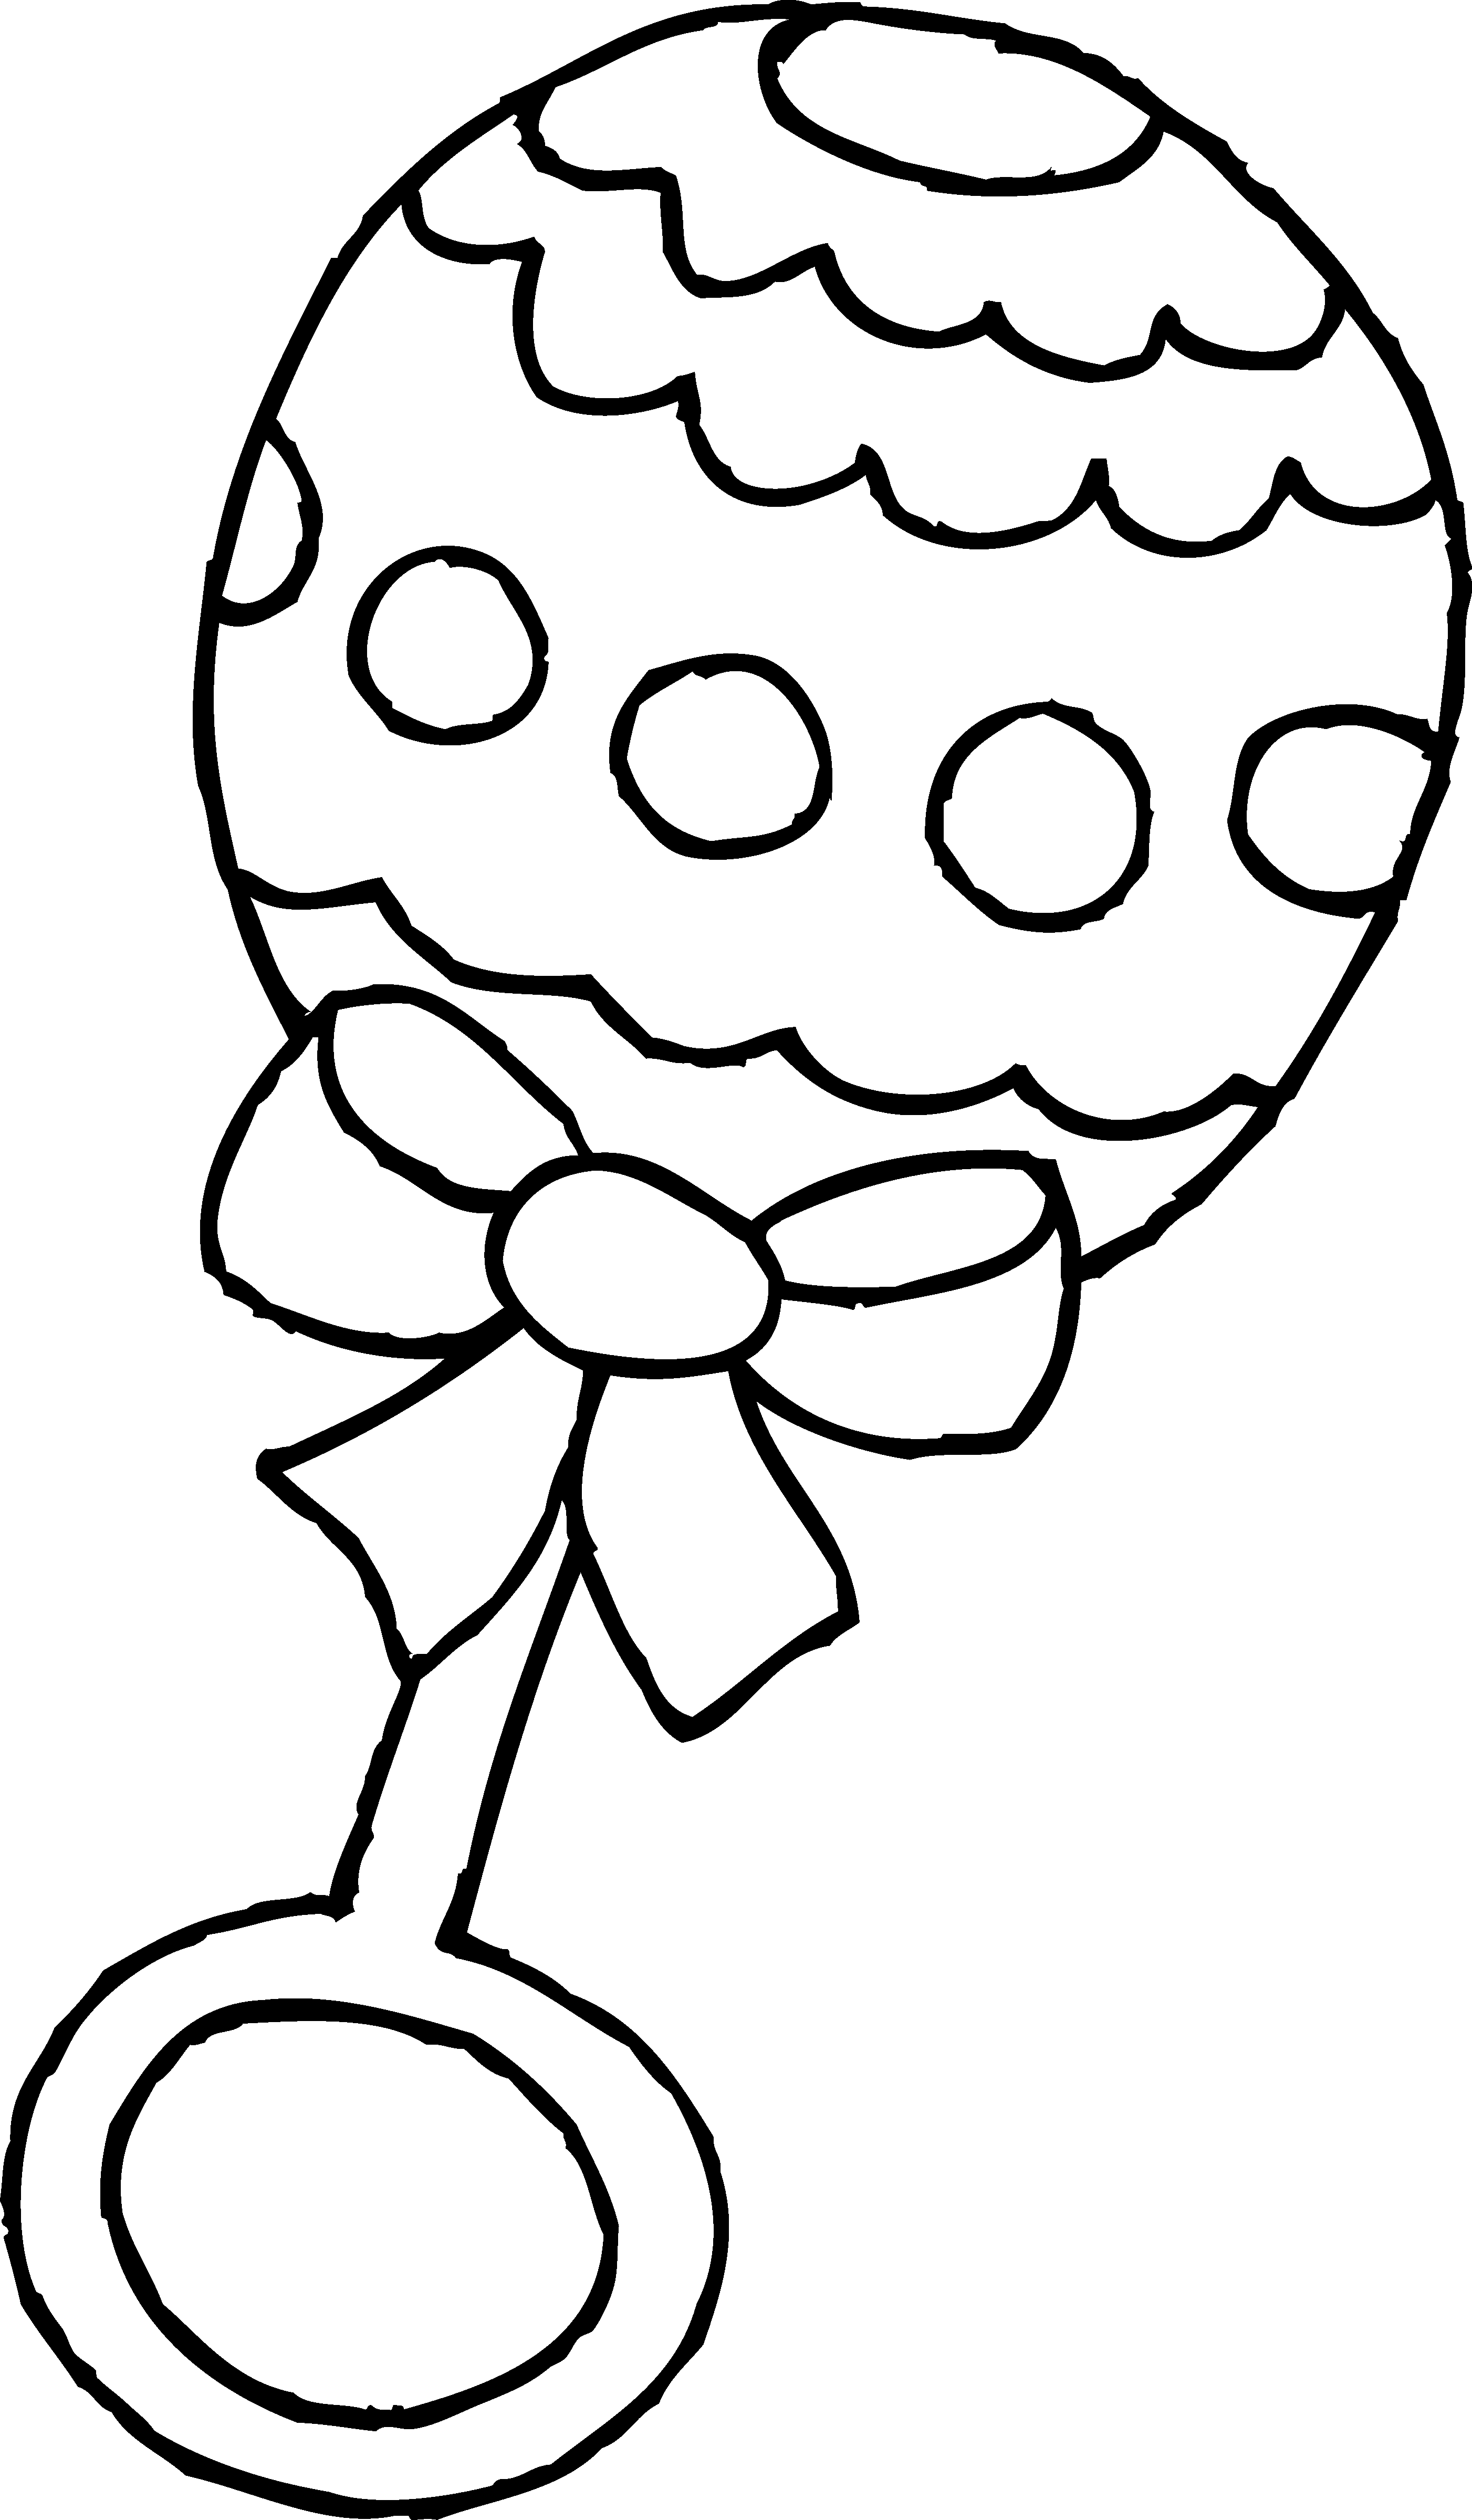 Baby Rattle Clip Art Black and White.